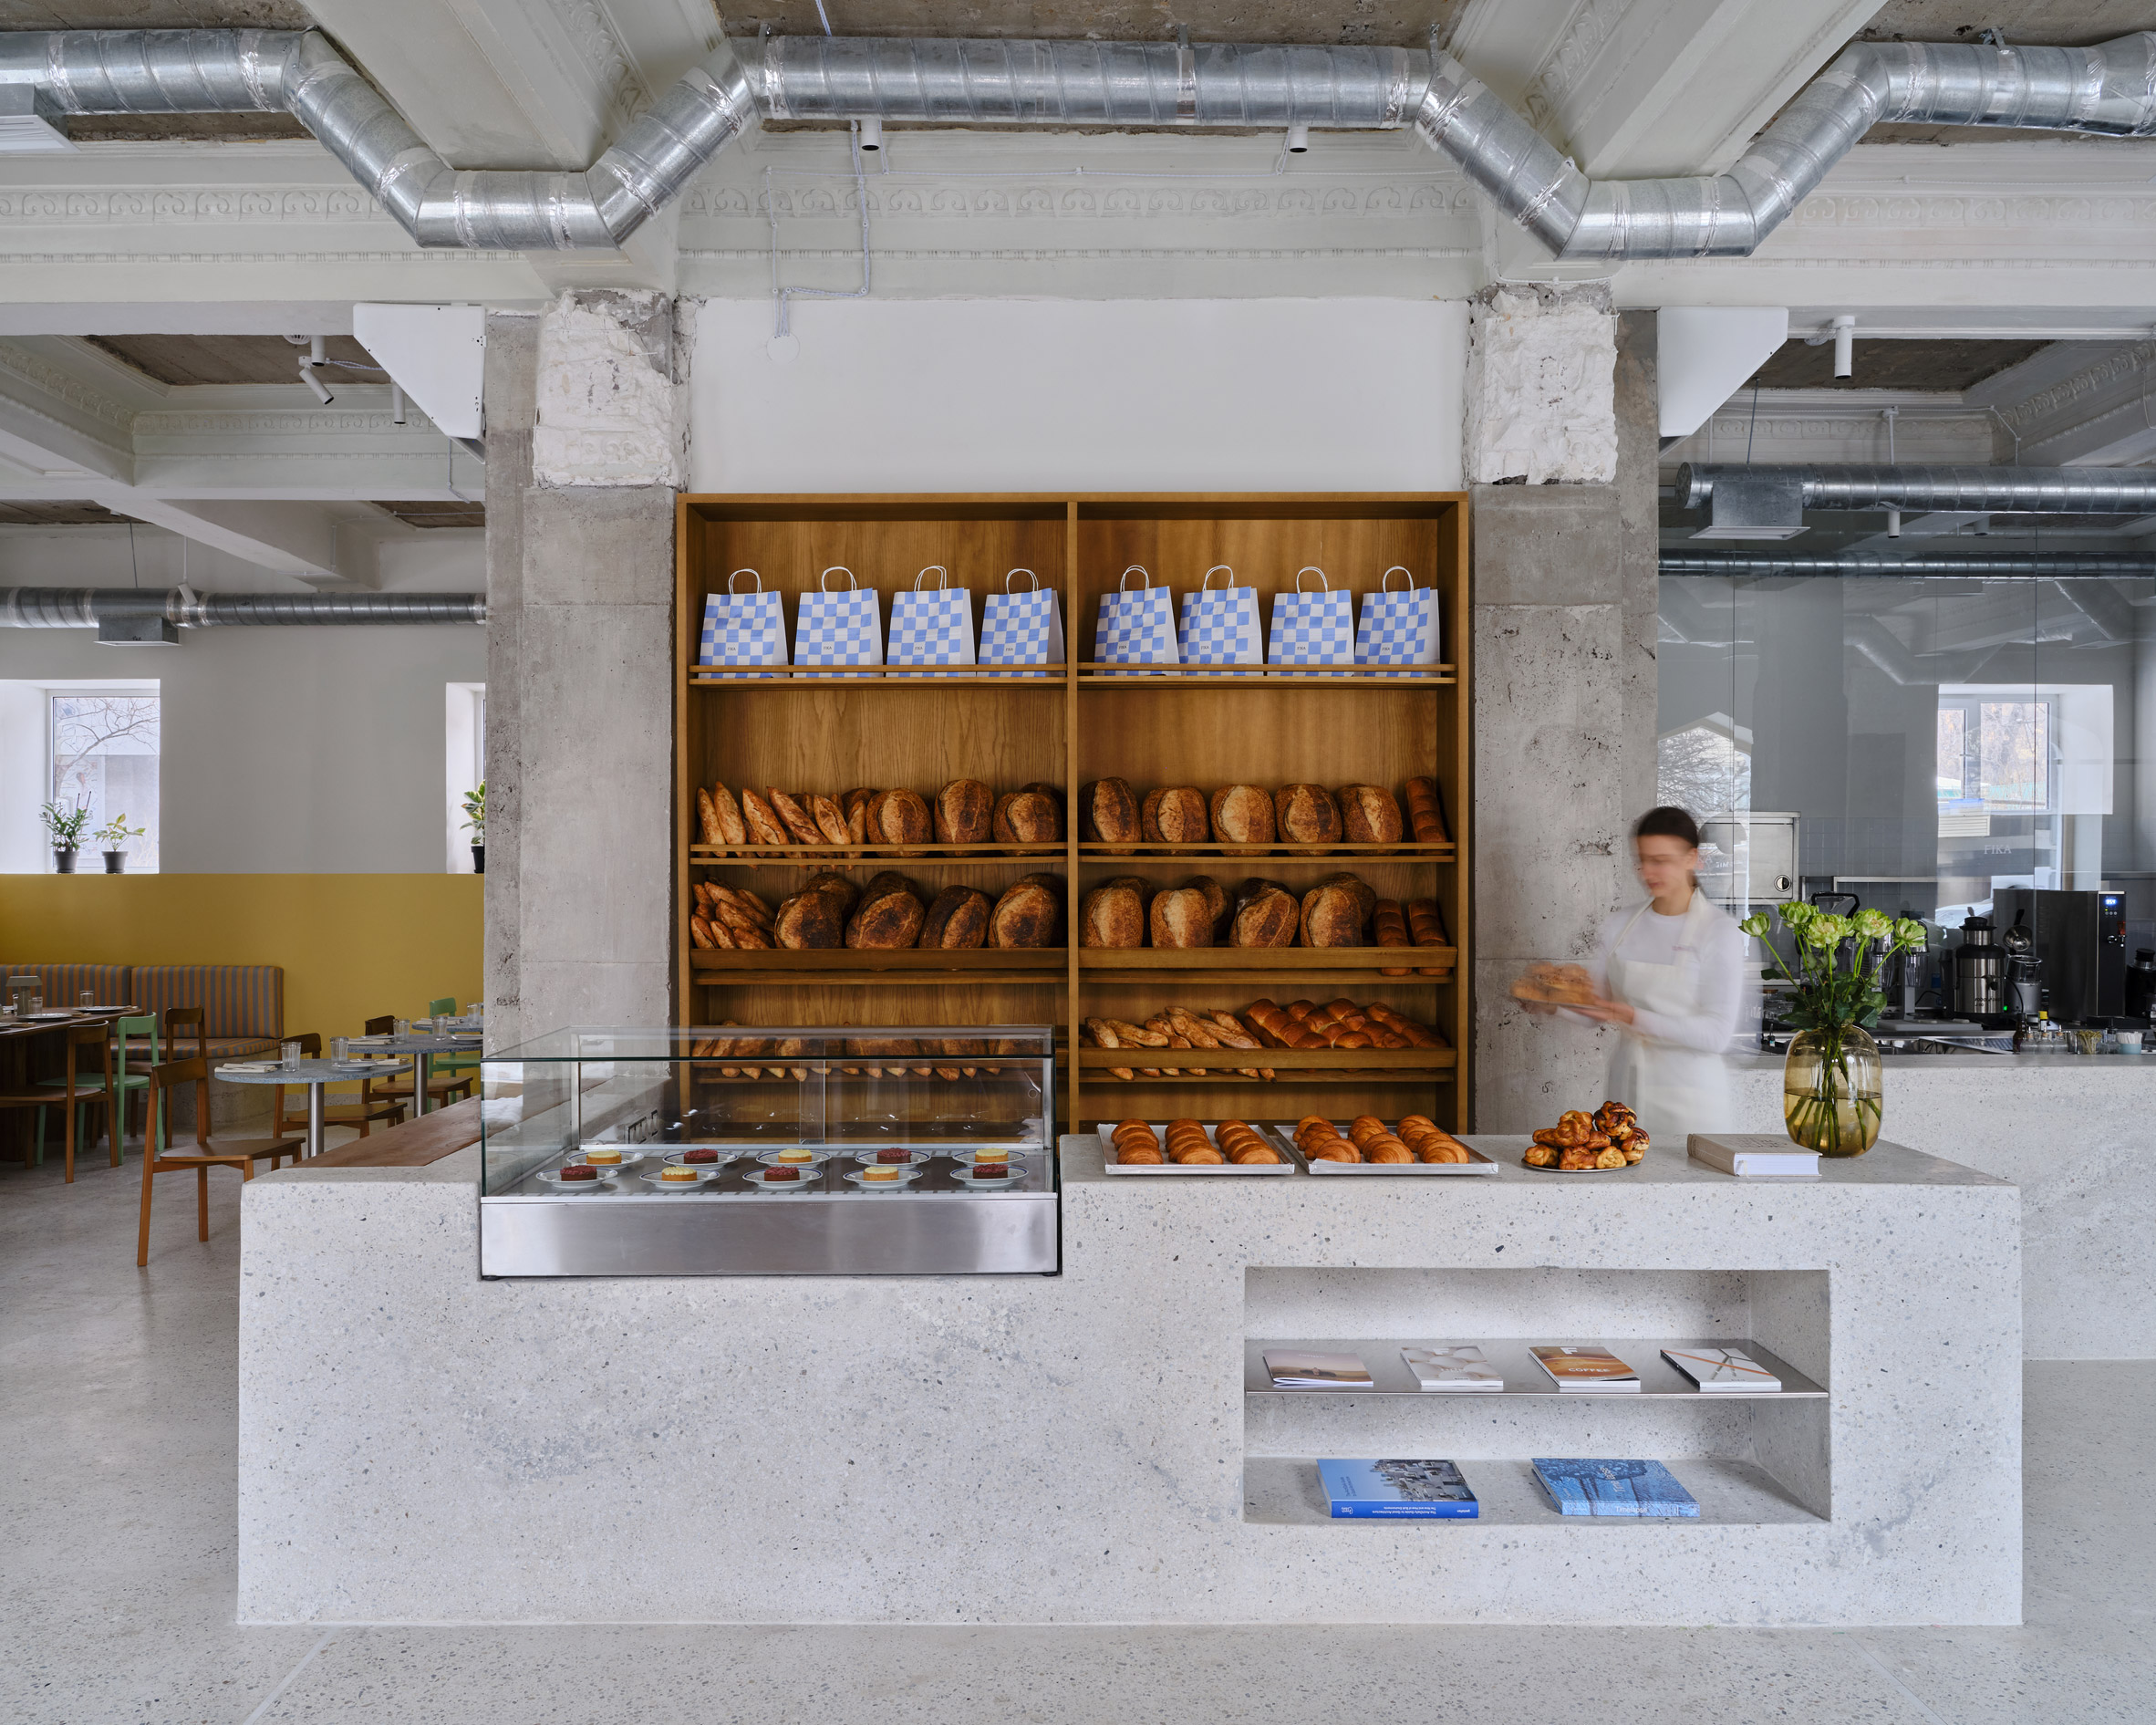 Bench and baked goods display within FIKA Restaurant in Kazakhstan by NAAW Studio